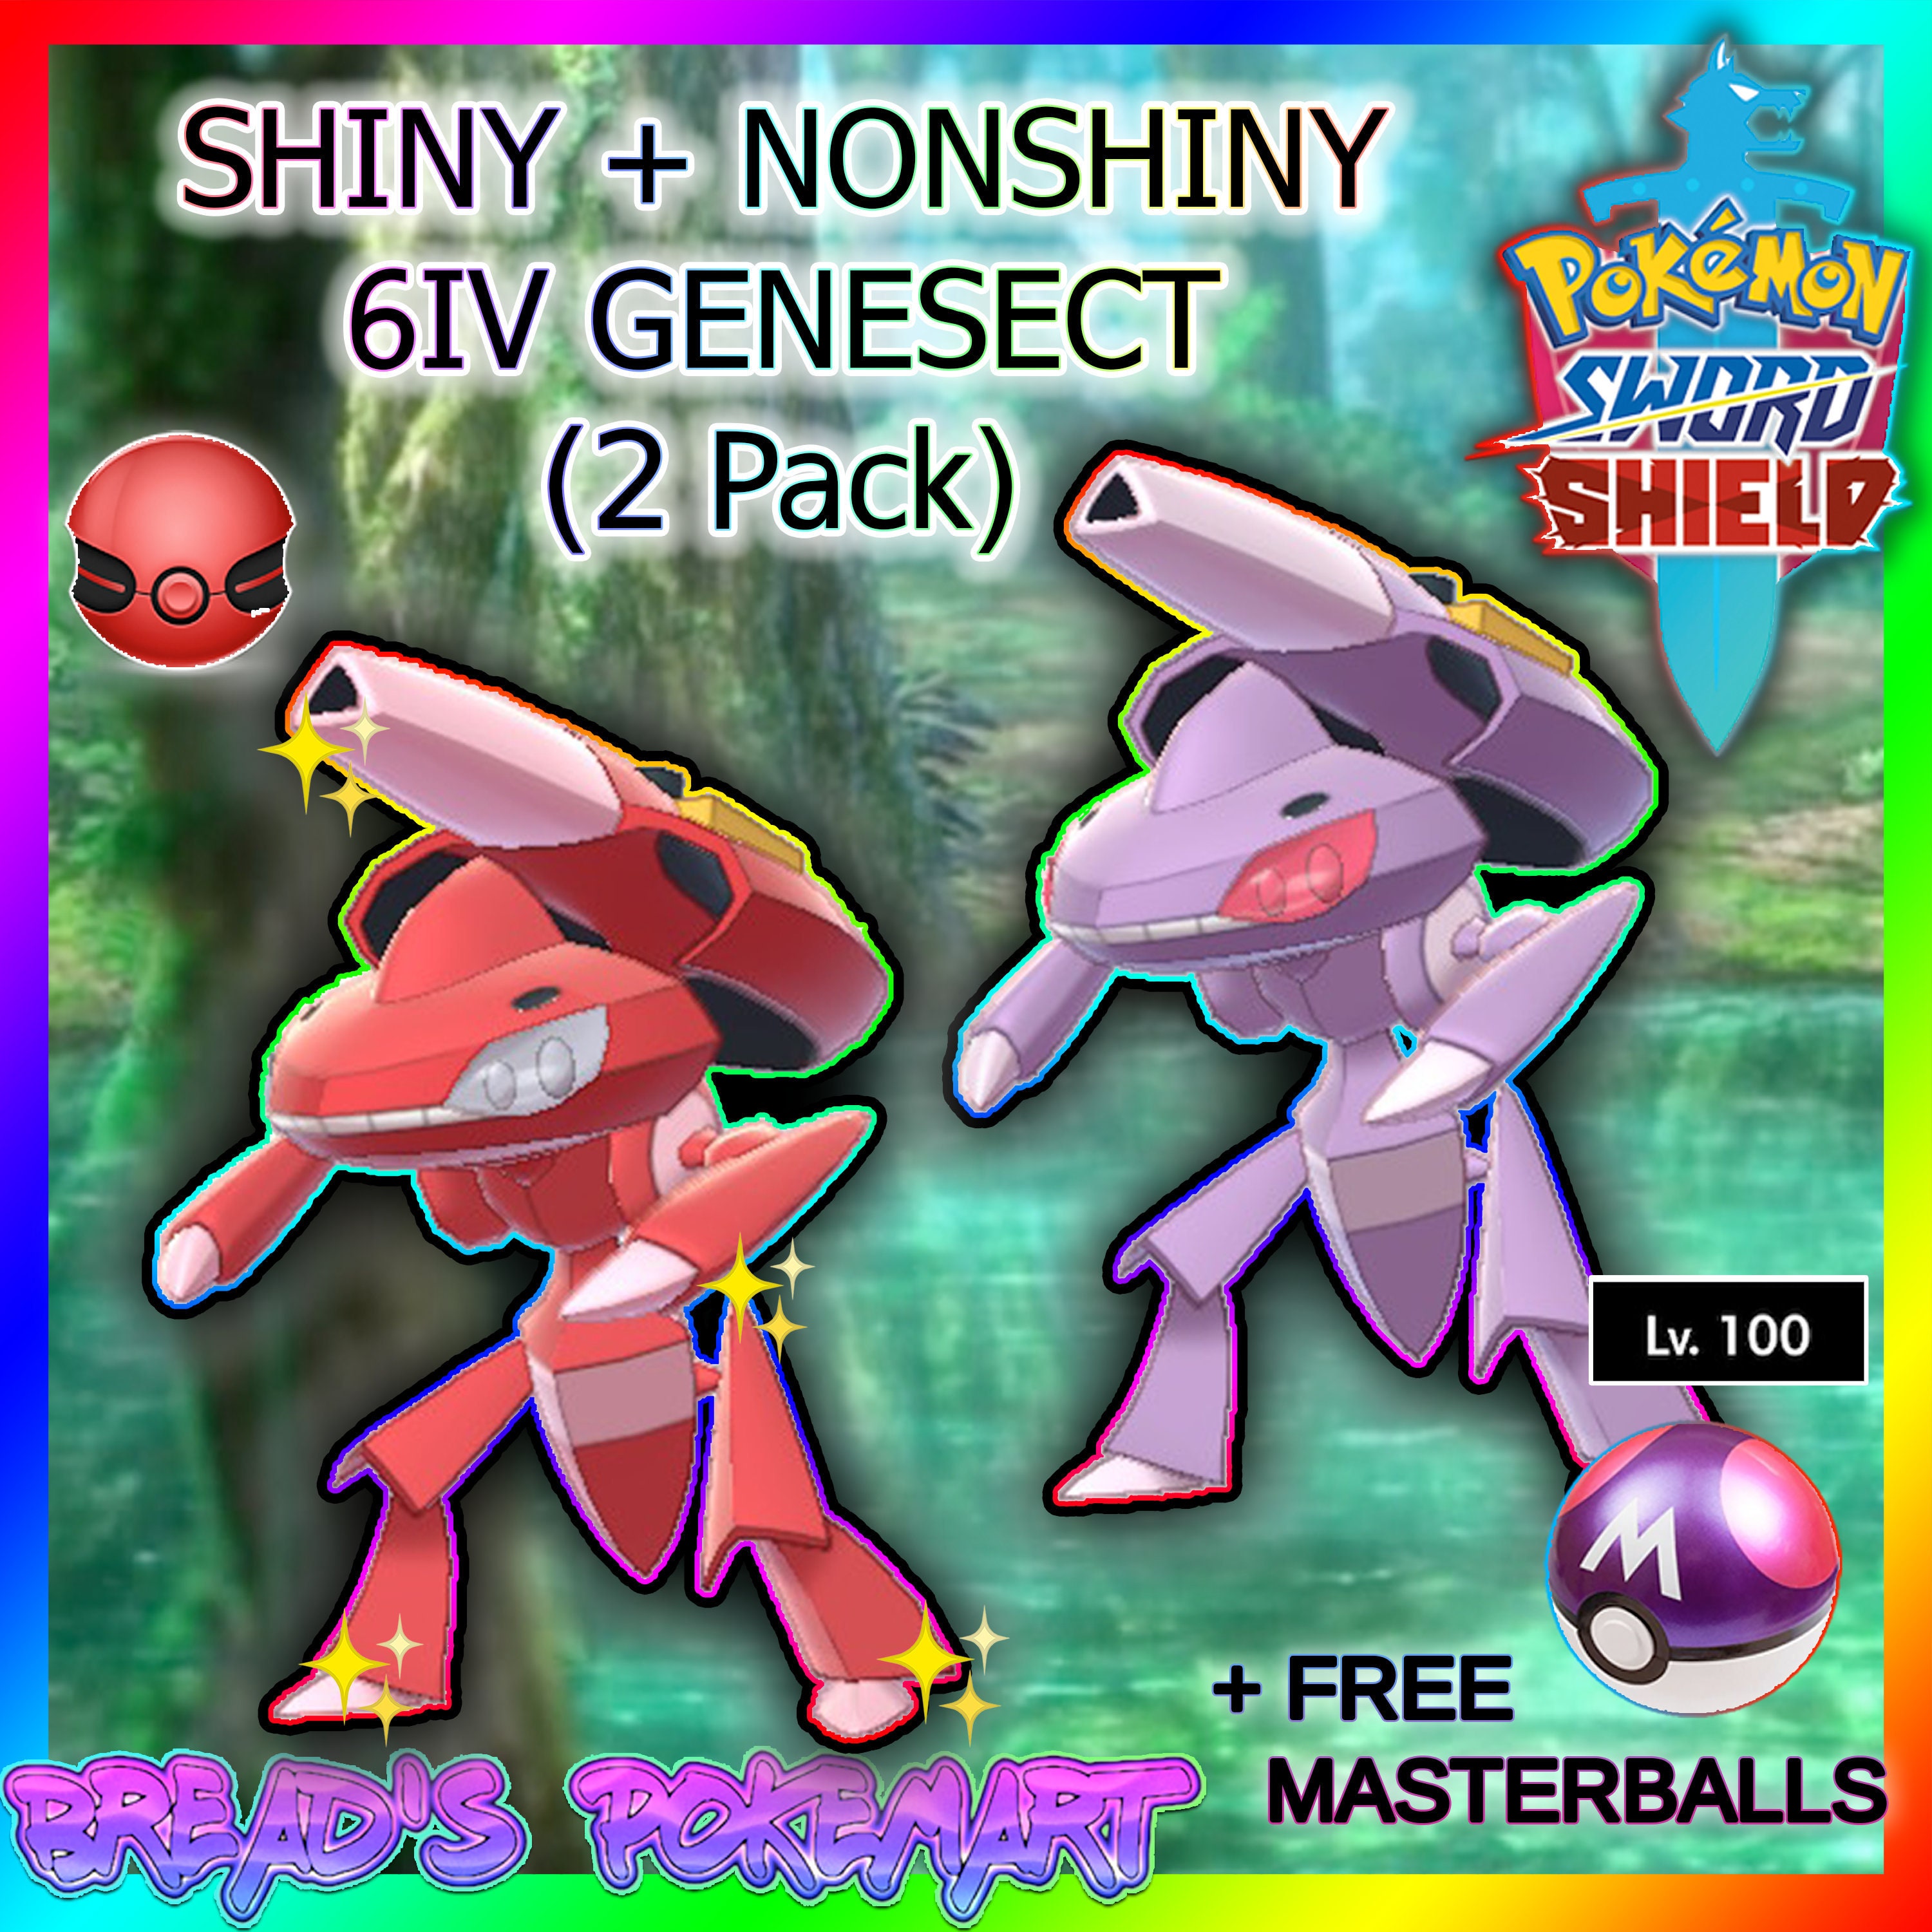 Pokemon GO: How To Get Shiny Genesect (Douse)